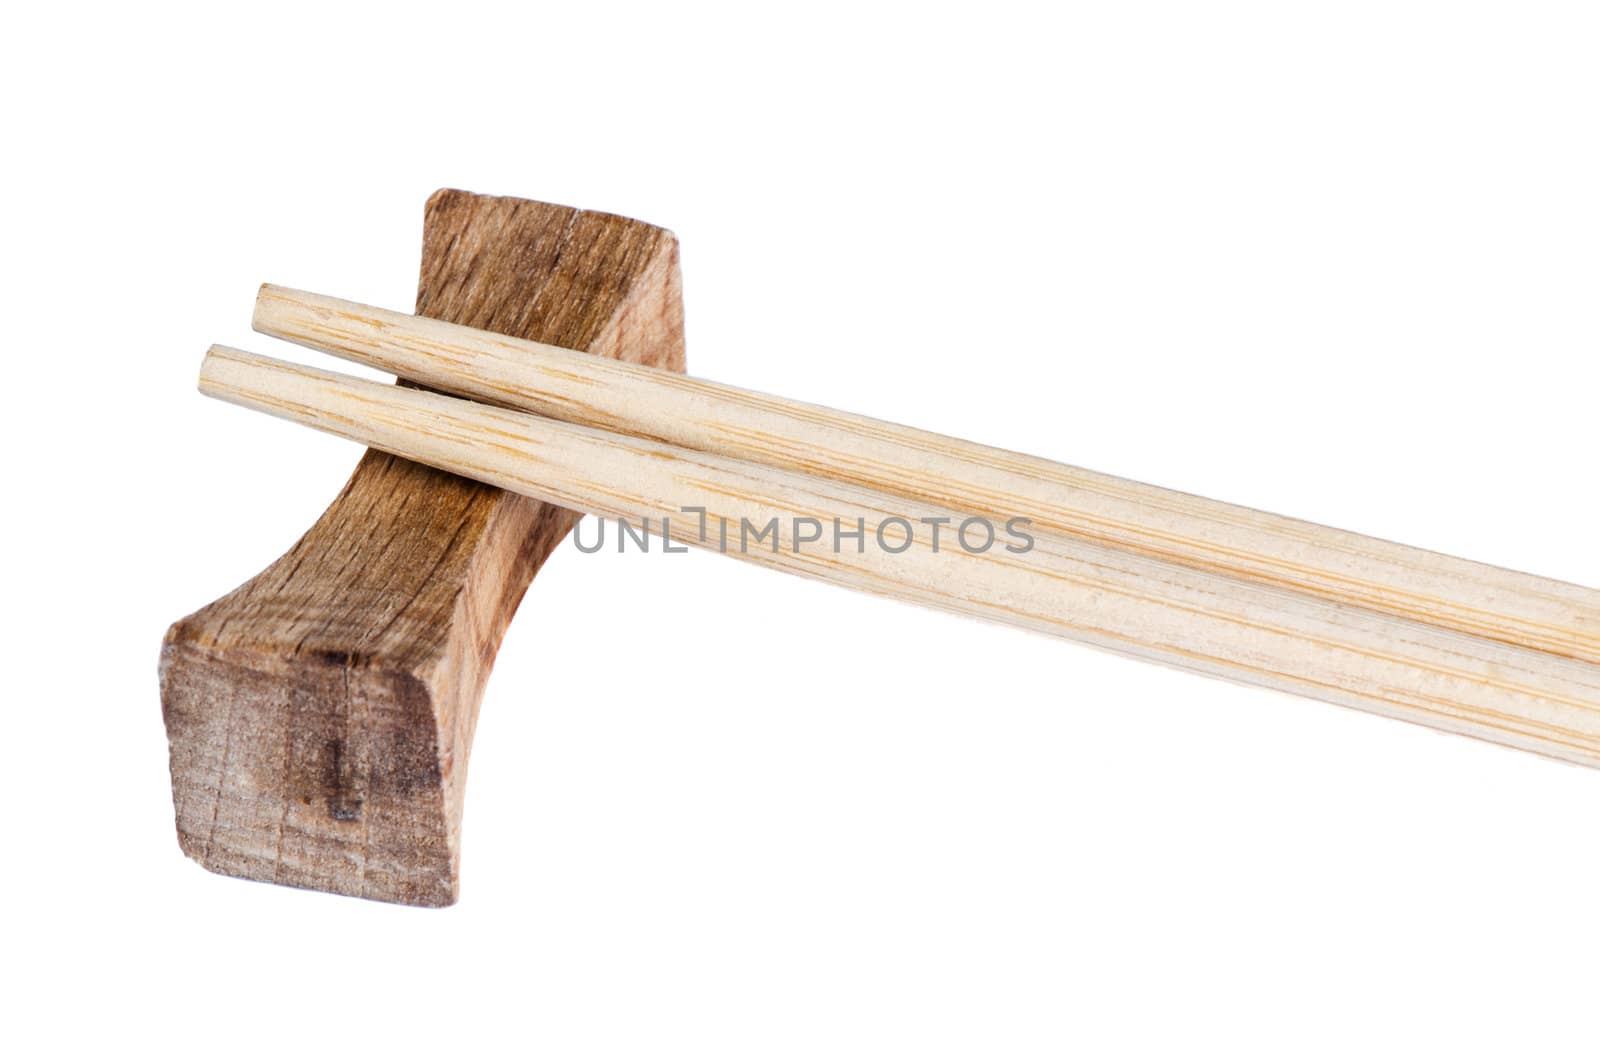 Wooden chopsticks isolated on white background